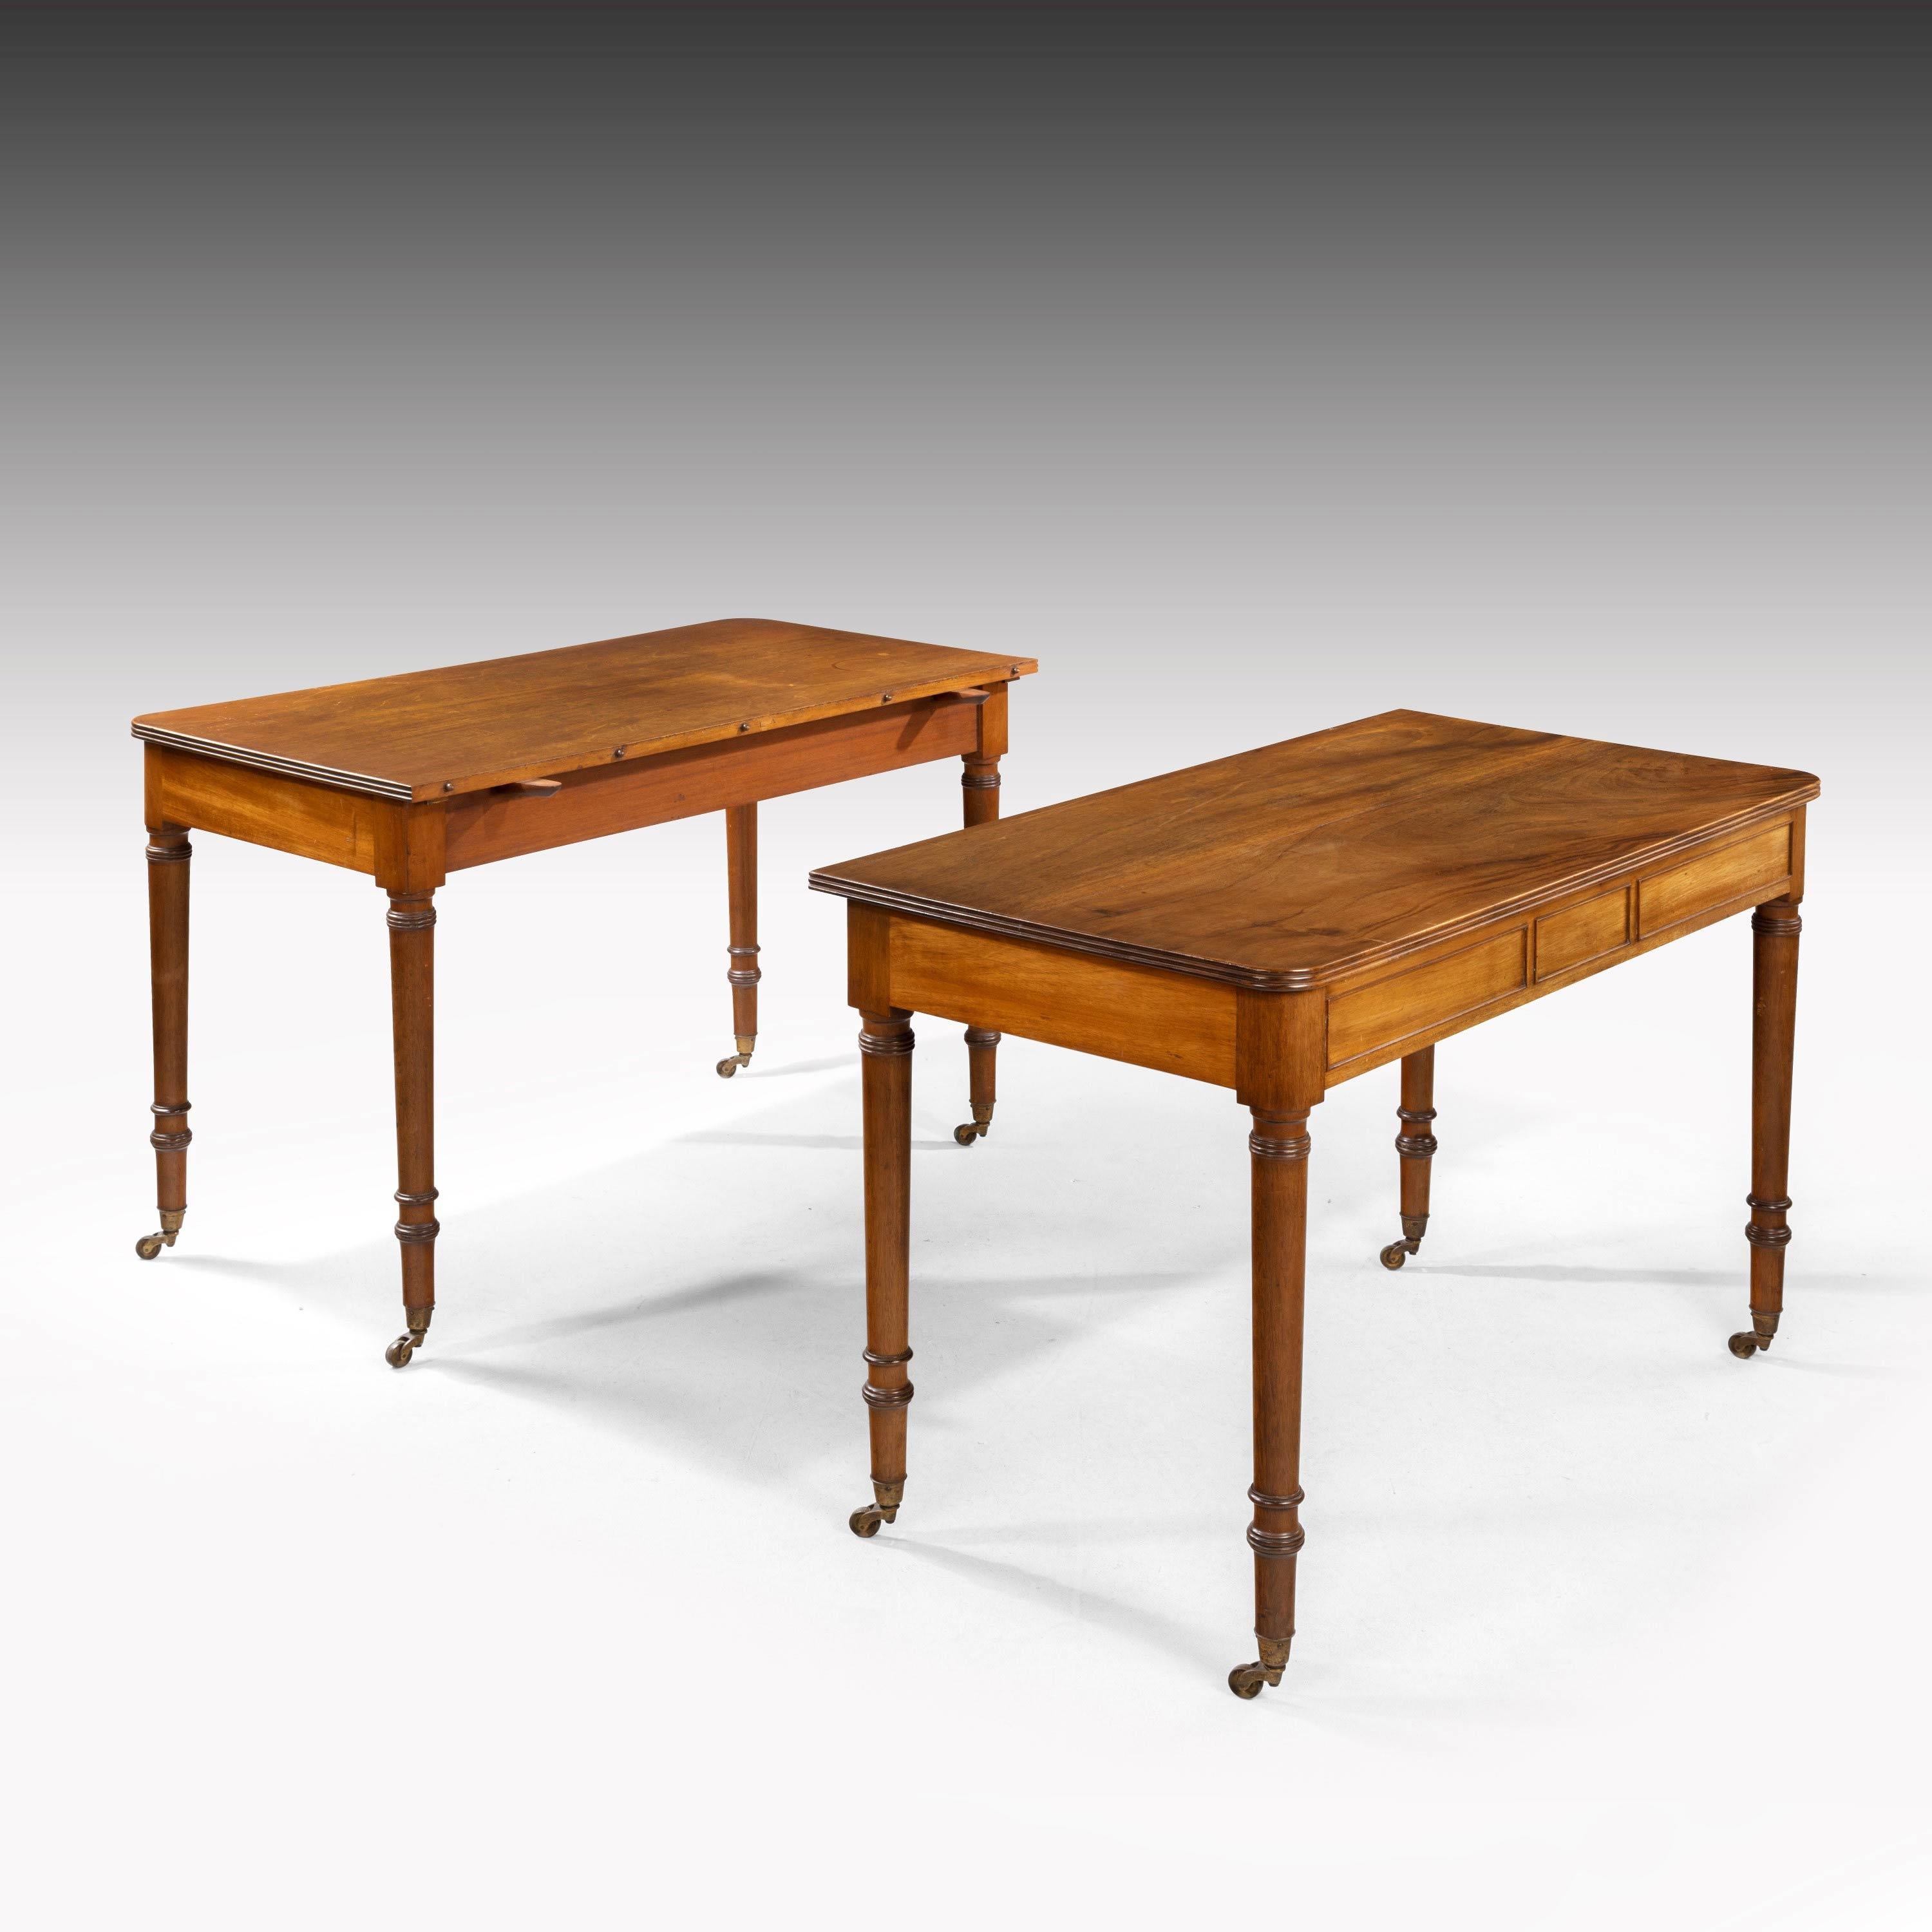 Attractive George III Mahogany Dining Table / Pair of Pier Tables In Good Condition In Peterborough, Northamptonshire